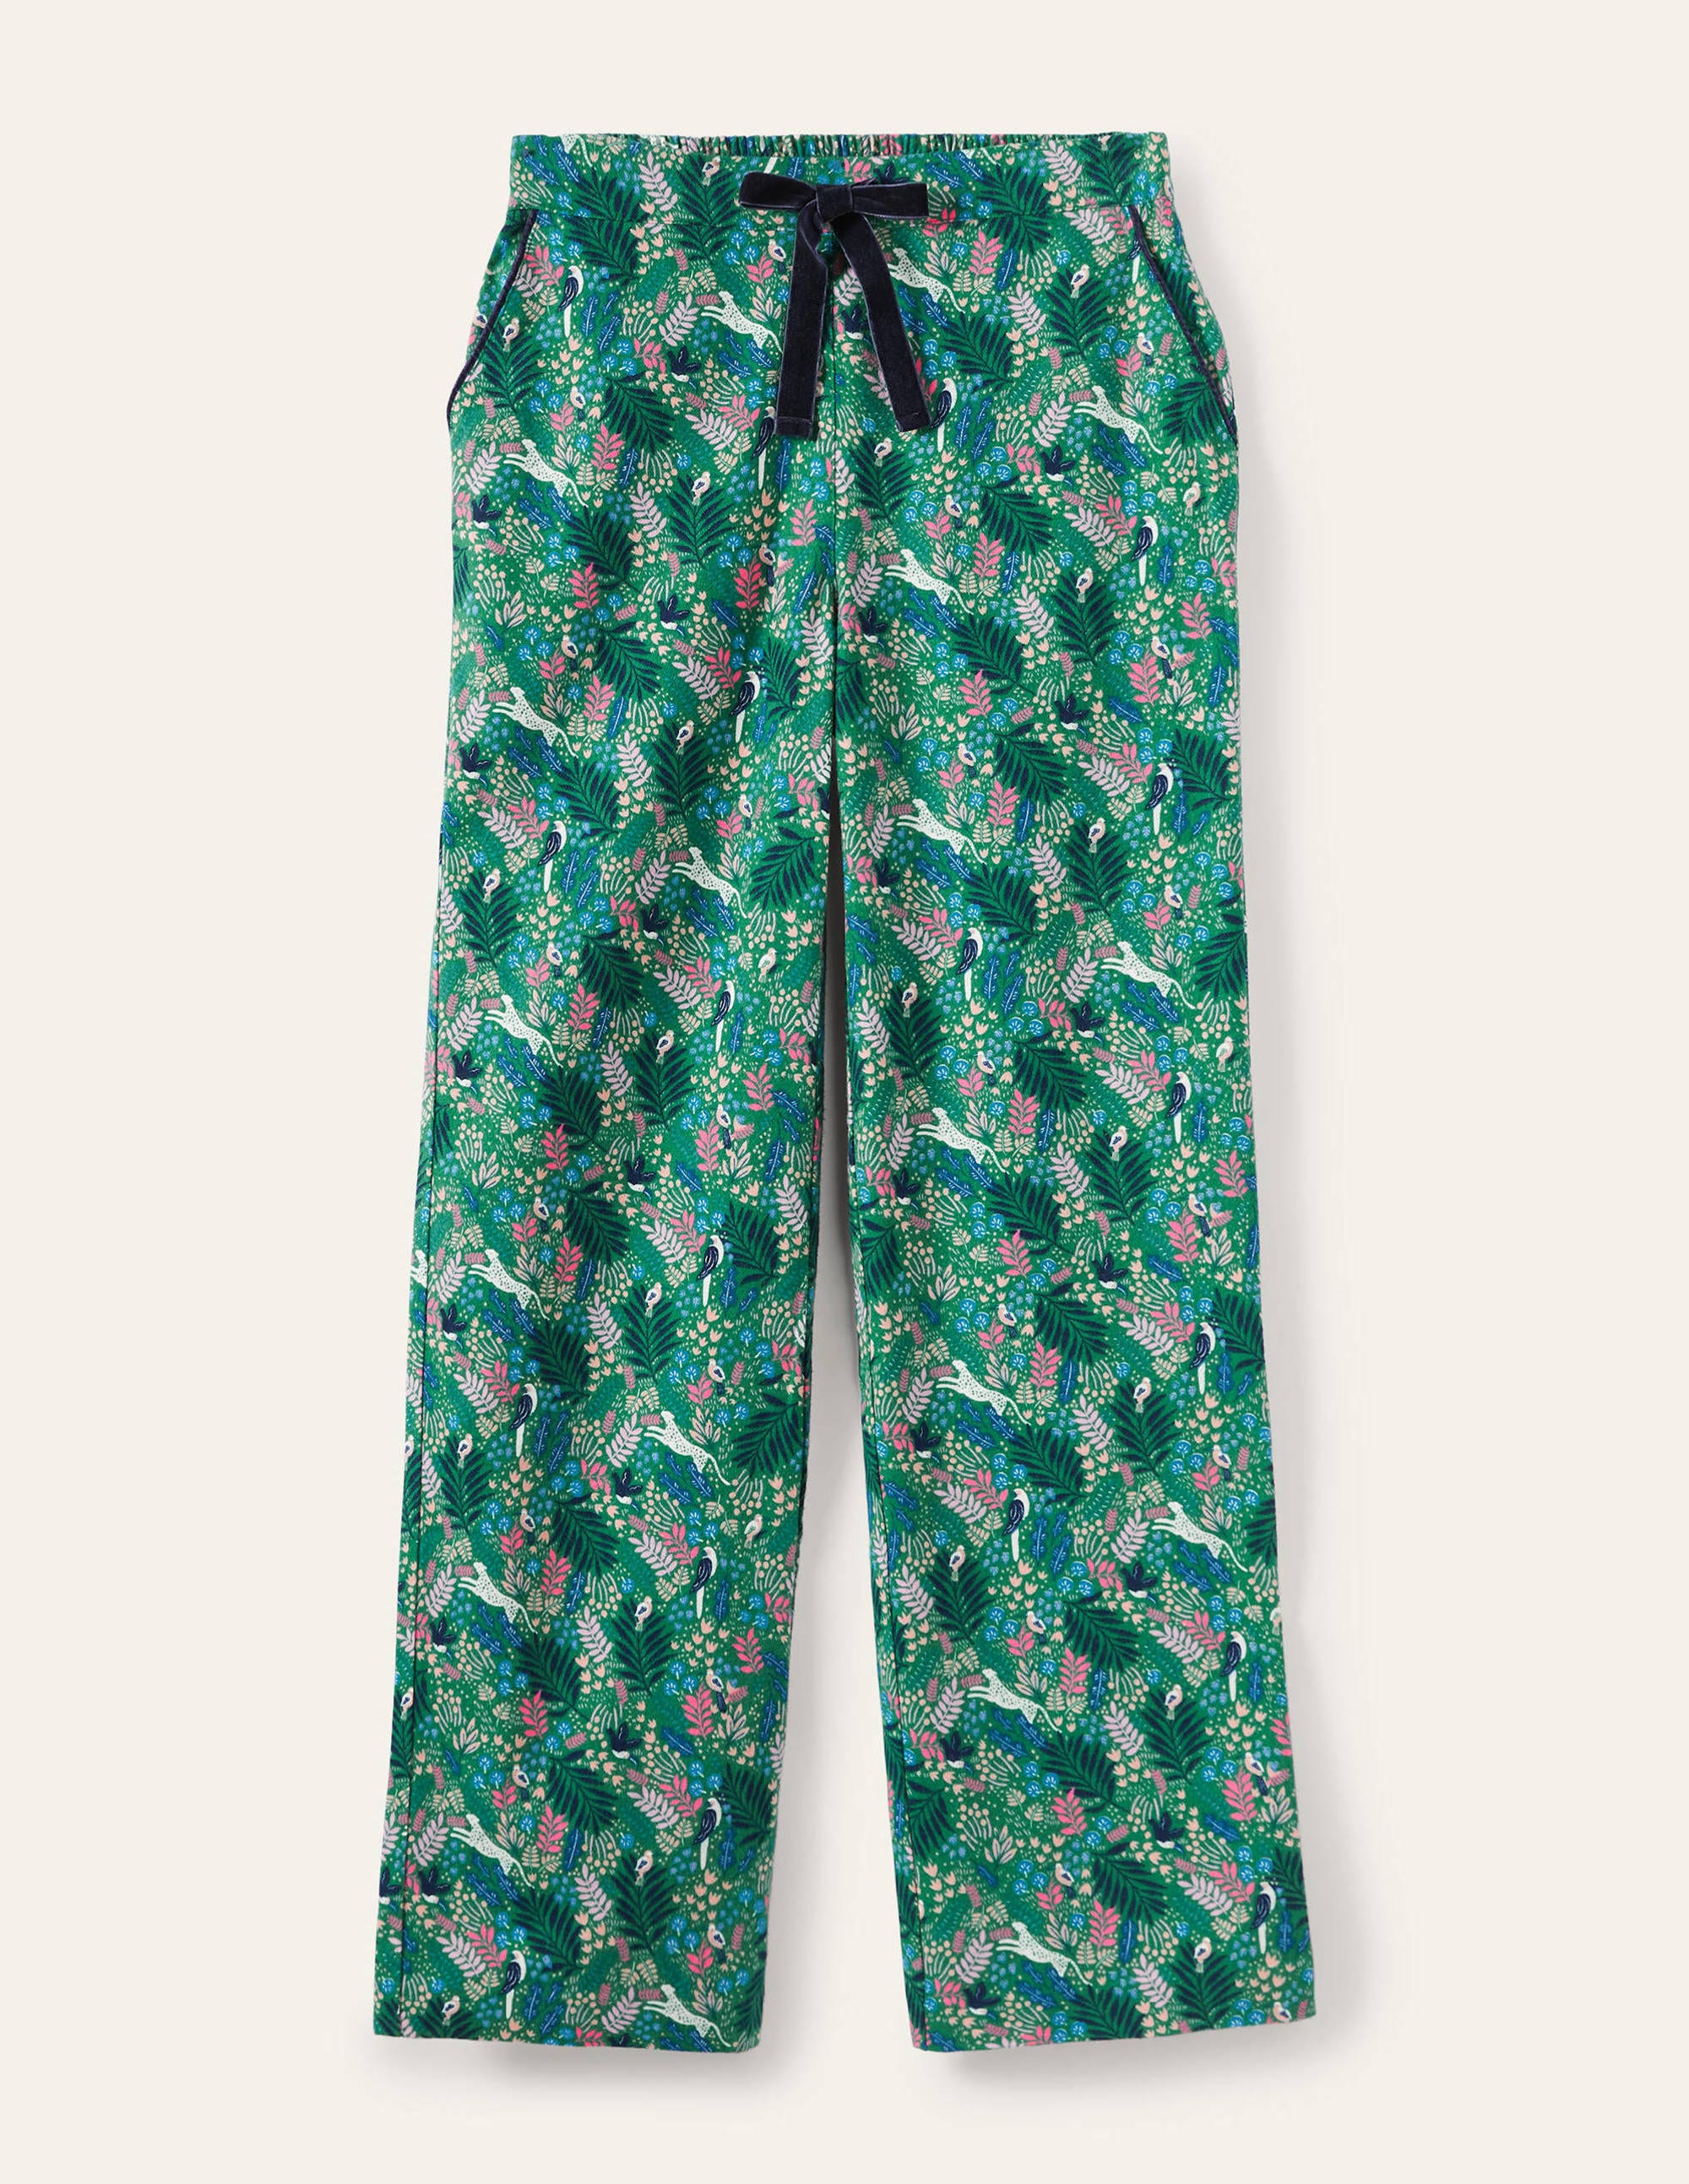 Vanessa Cosy Bottoms - Leafy Green, Jungle Chase | Boden US